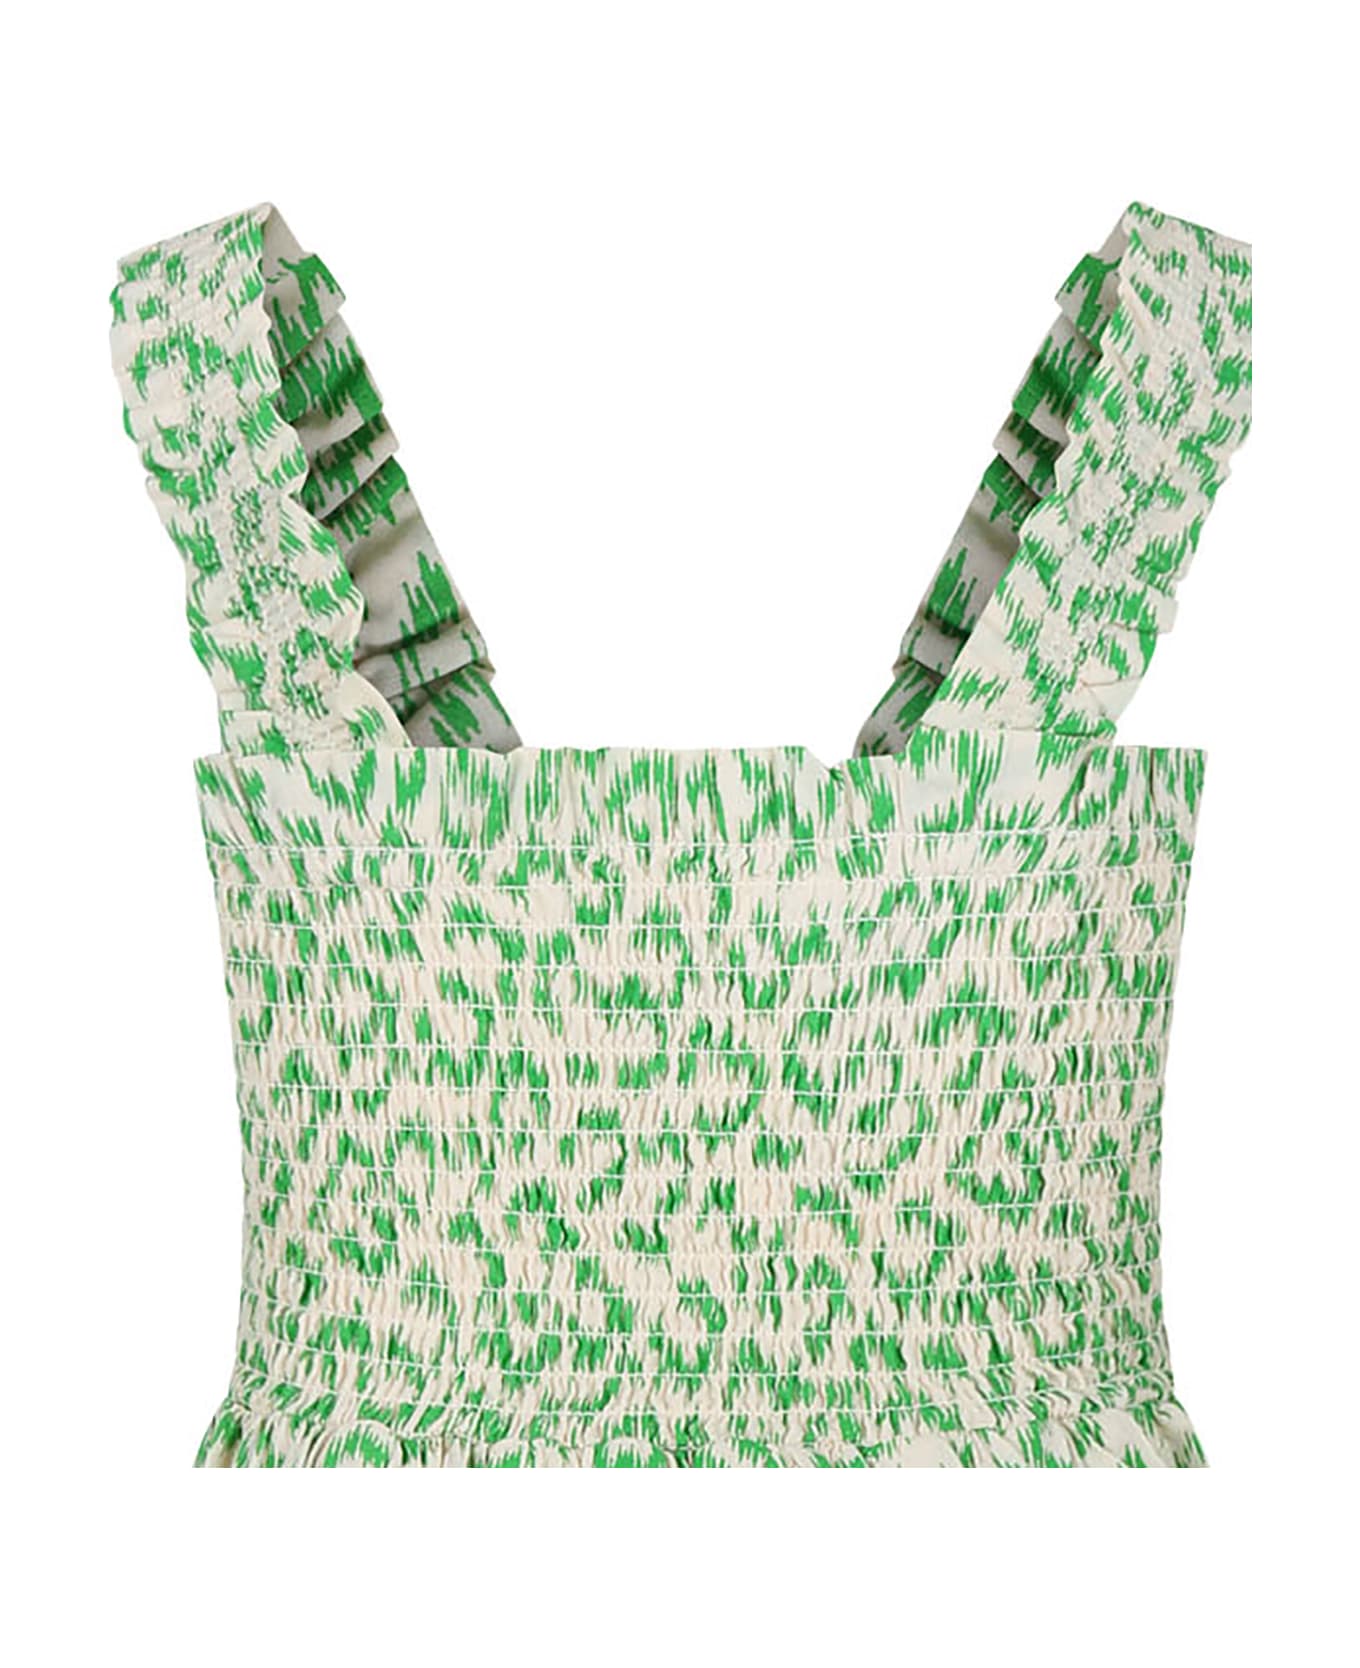 Molo Green Dress For Girl With Print - Green